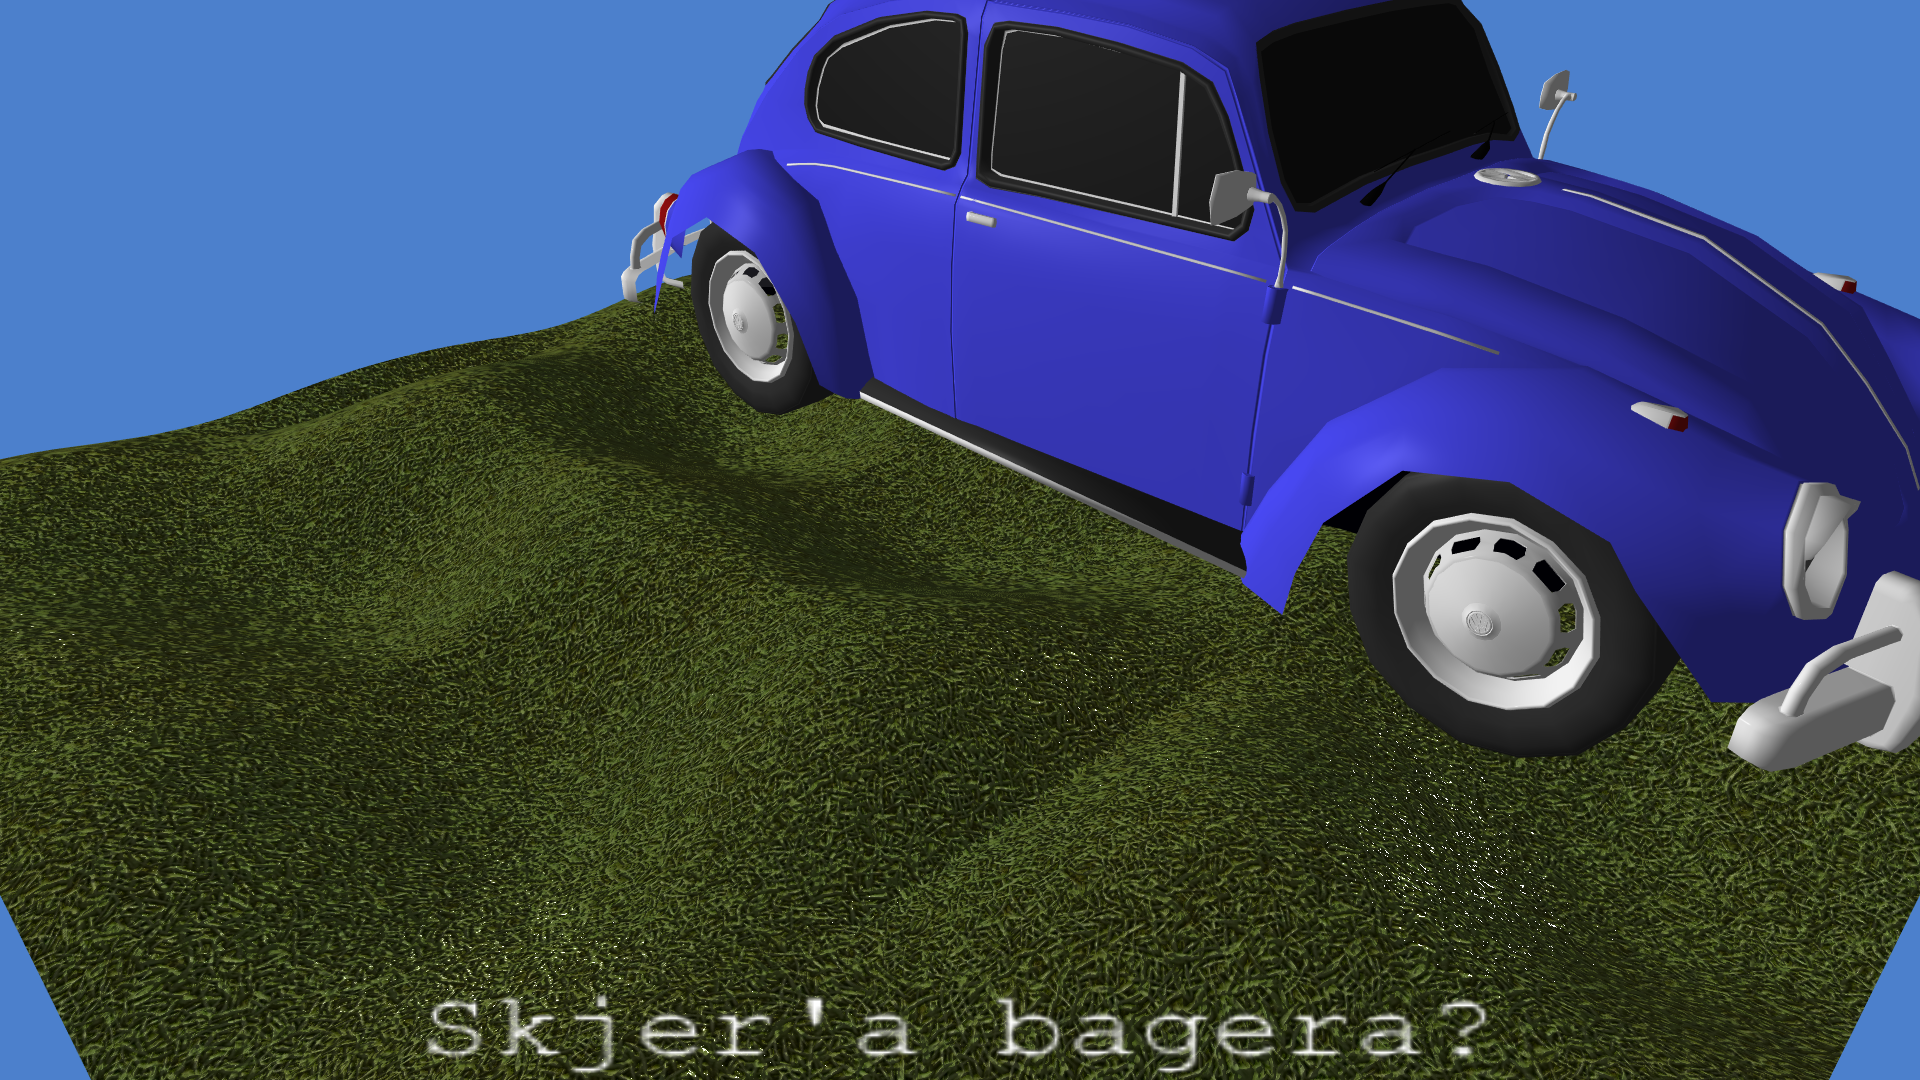 Diffuse colors loaded from car model